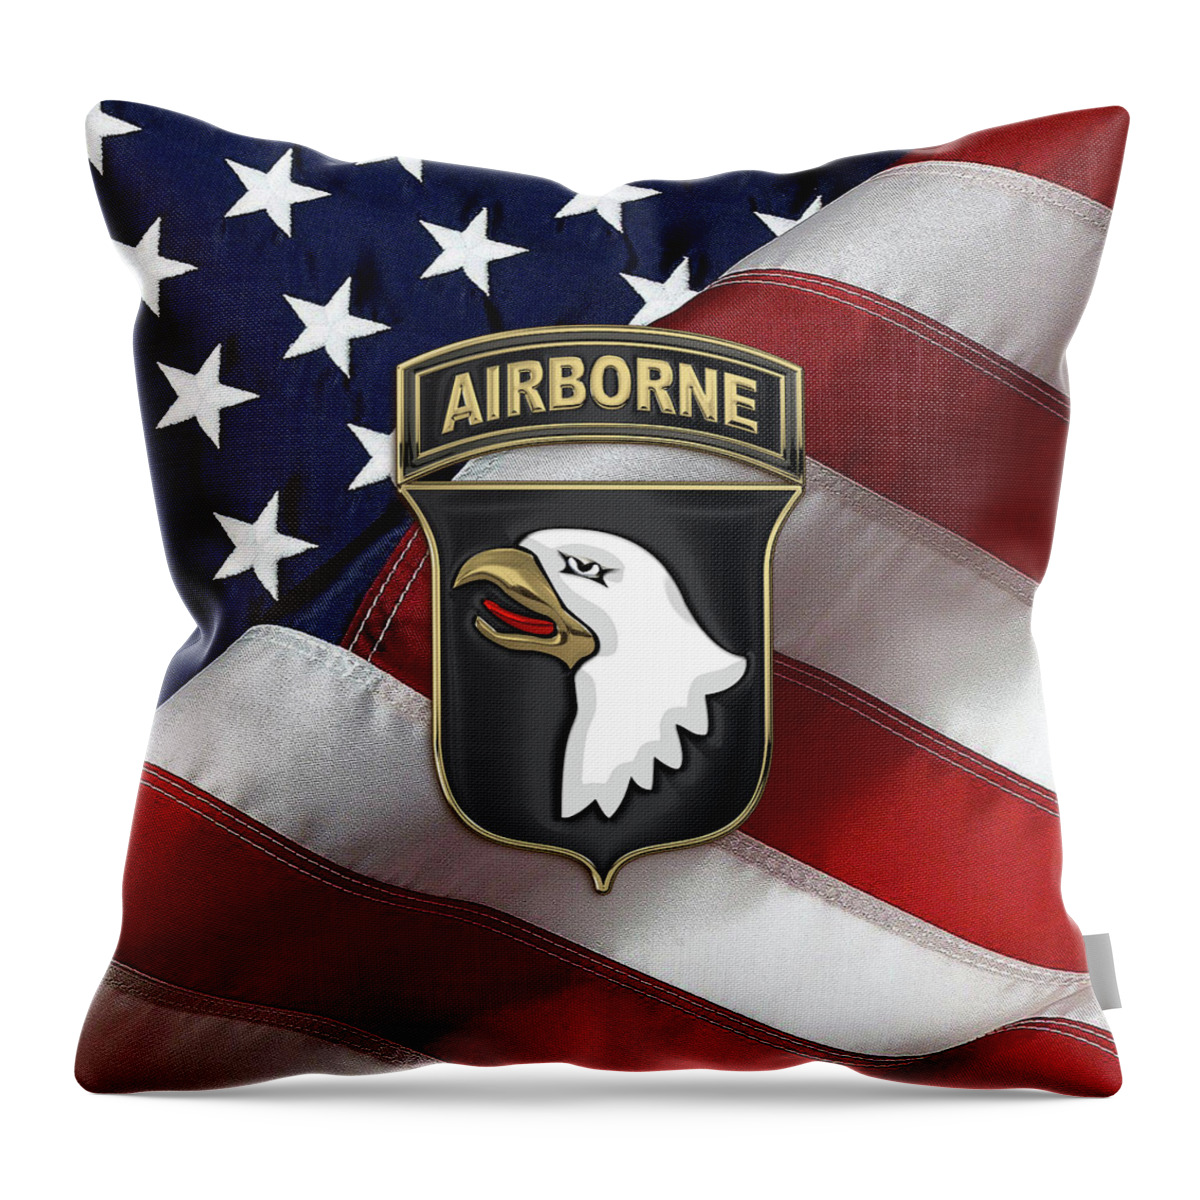 Military Insignia & Heraldry By Serge Averbukh Throw Pillow featuring the digital art 101st Airborne Division - 101st A B N Insignia over American Flag by Serge Averbukh